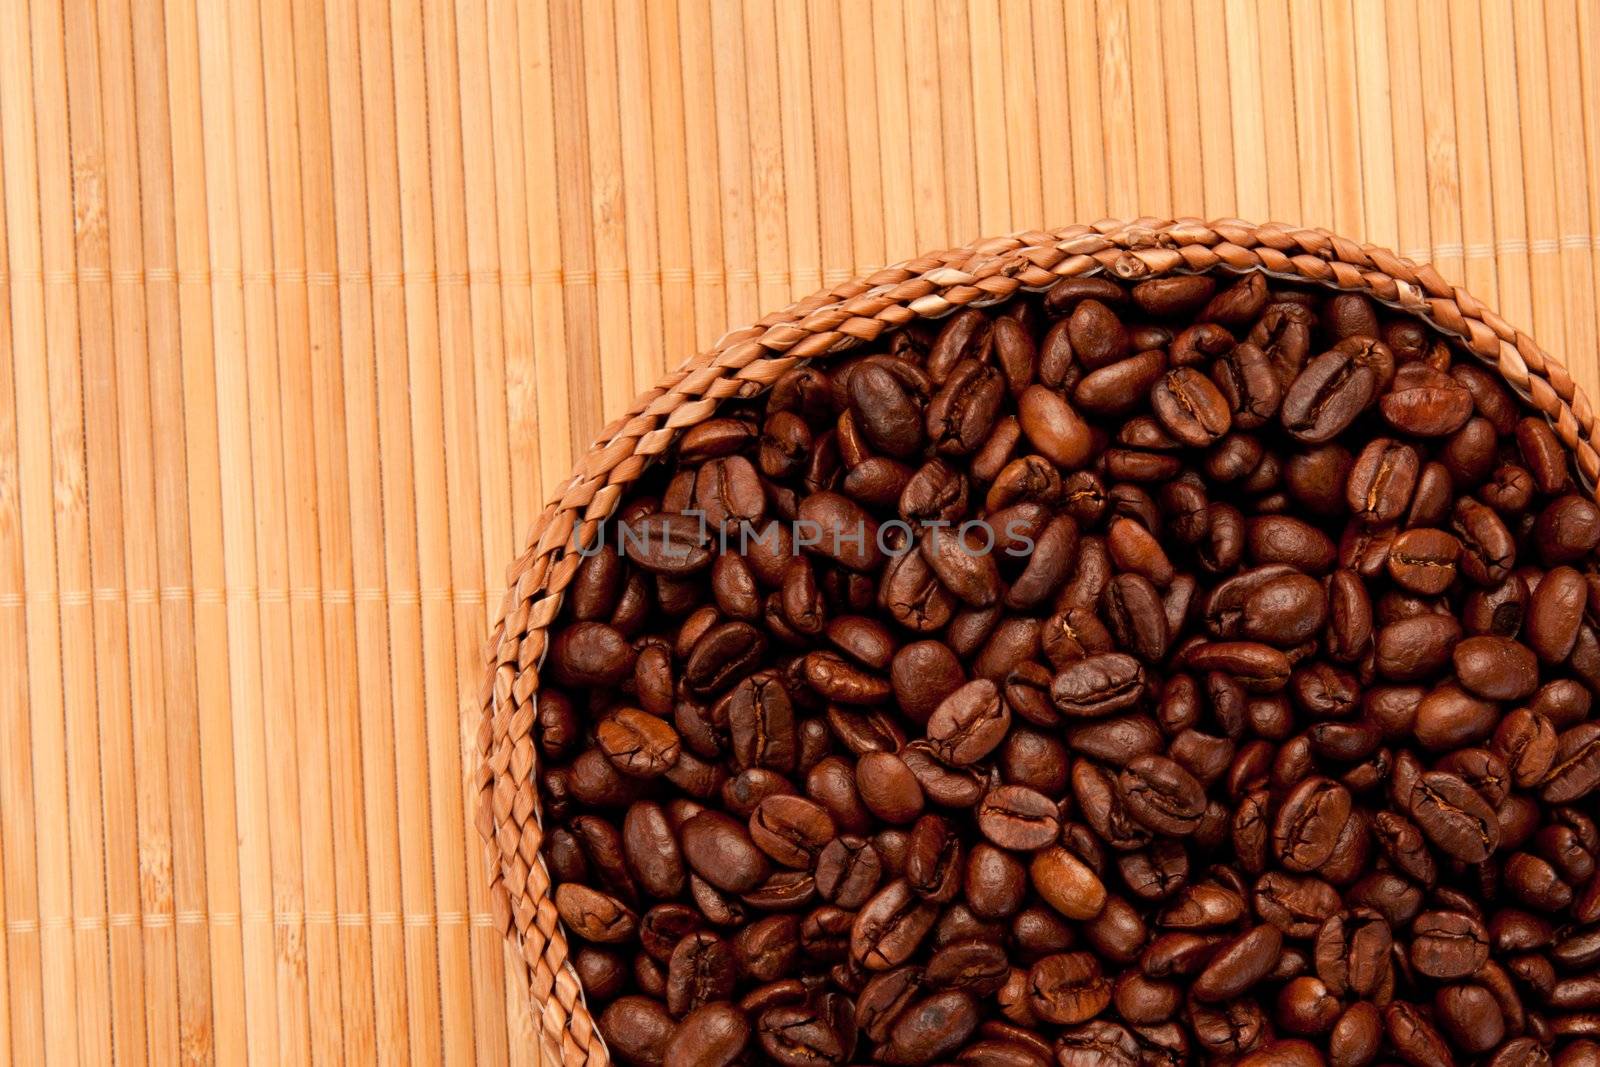 Basket filled with coffee beans by Wavebreakmedia